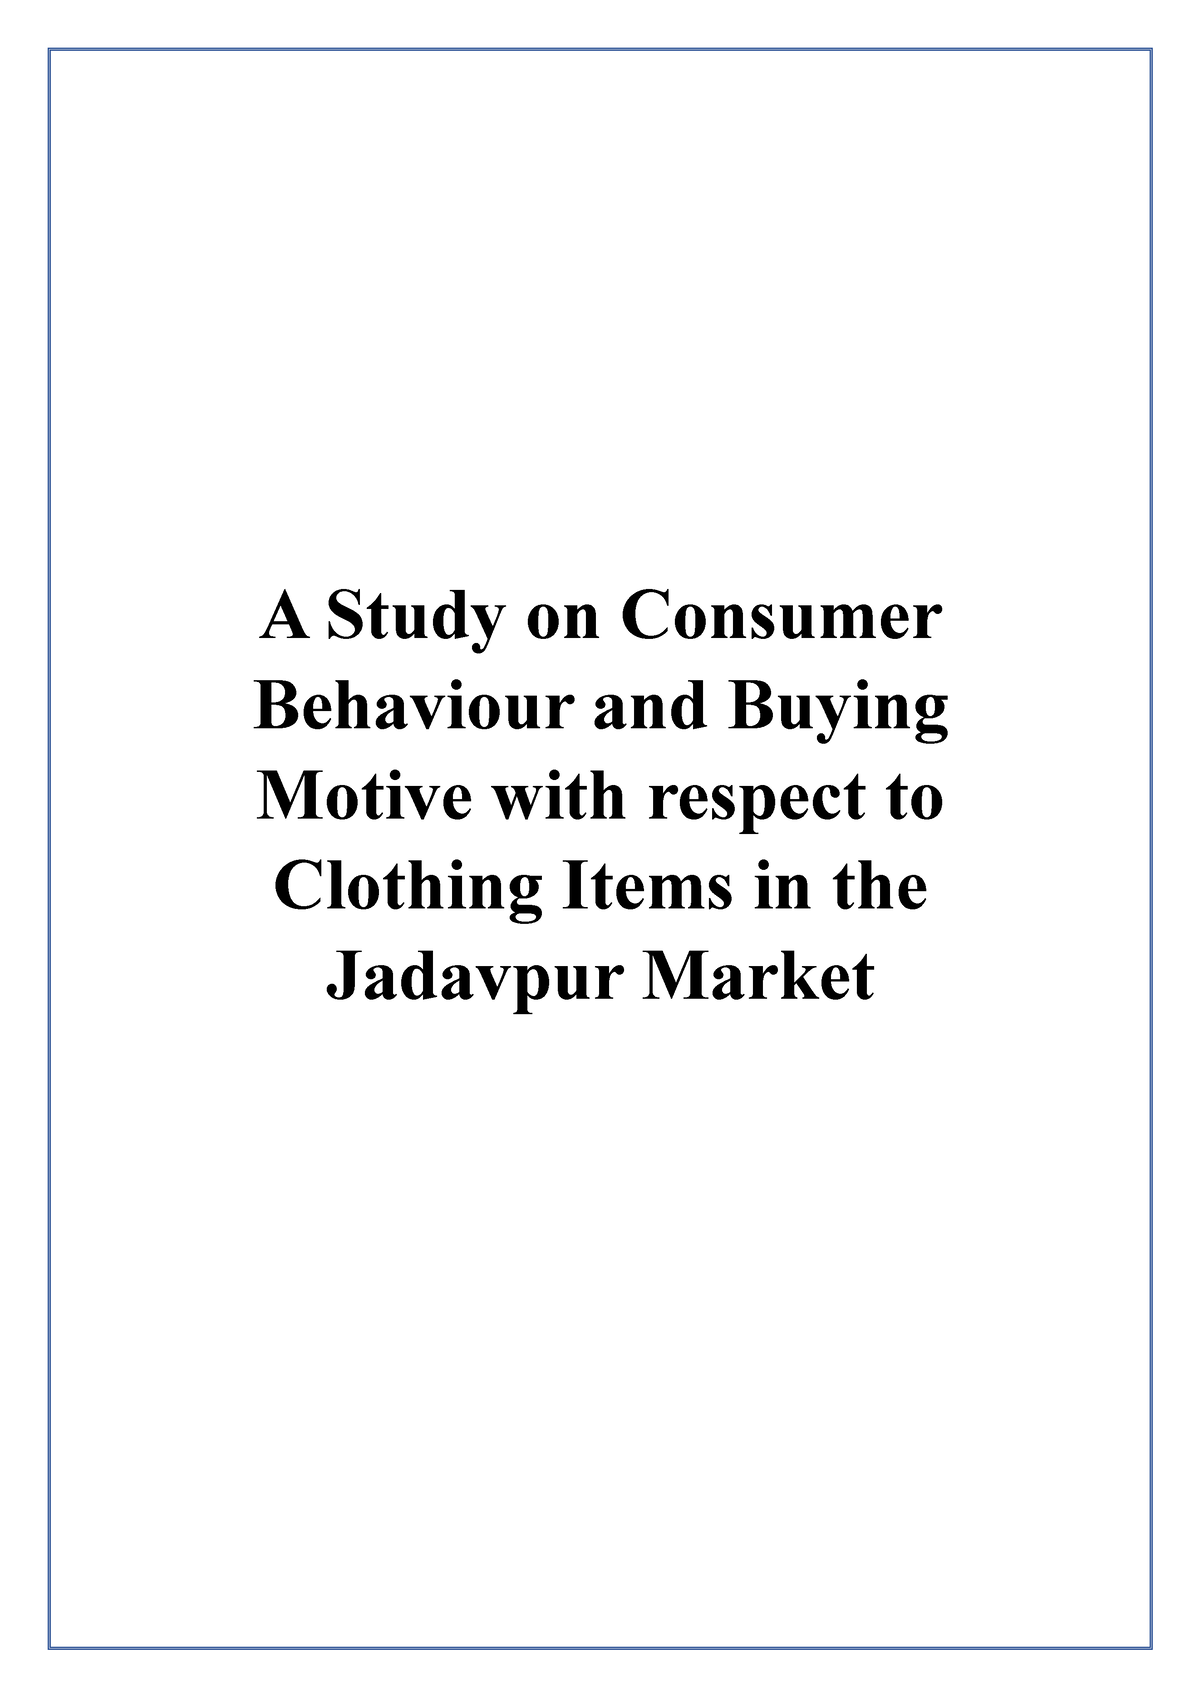 Project - A Study on Consumer Behaviour and Buying Motive with respect ...